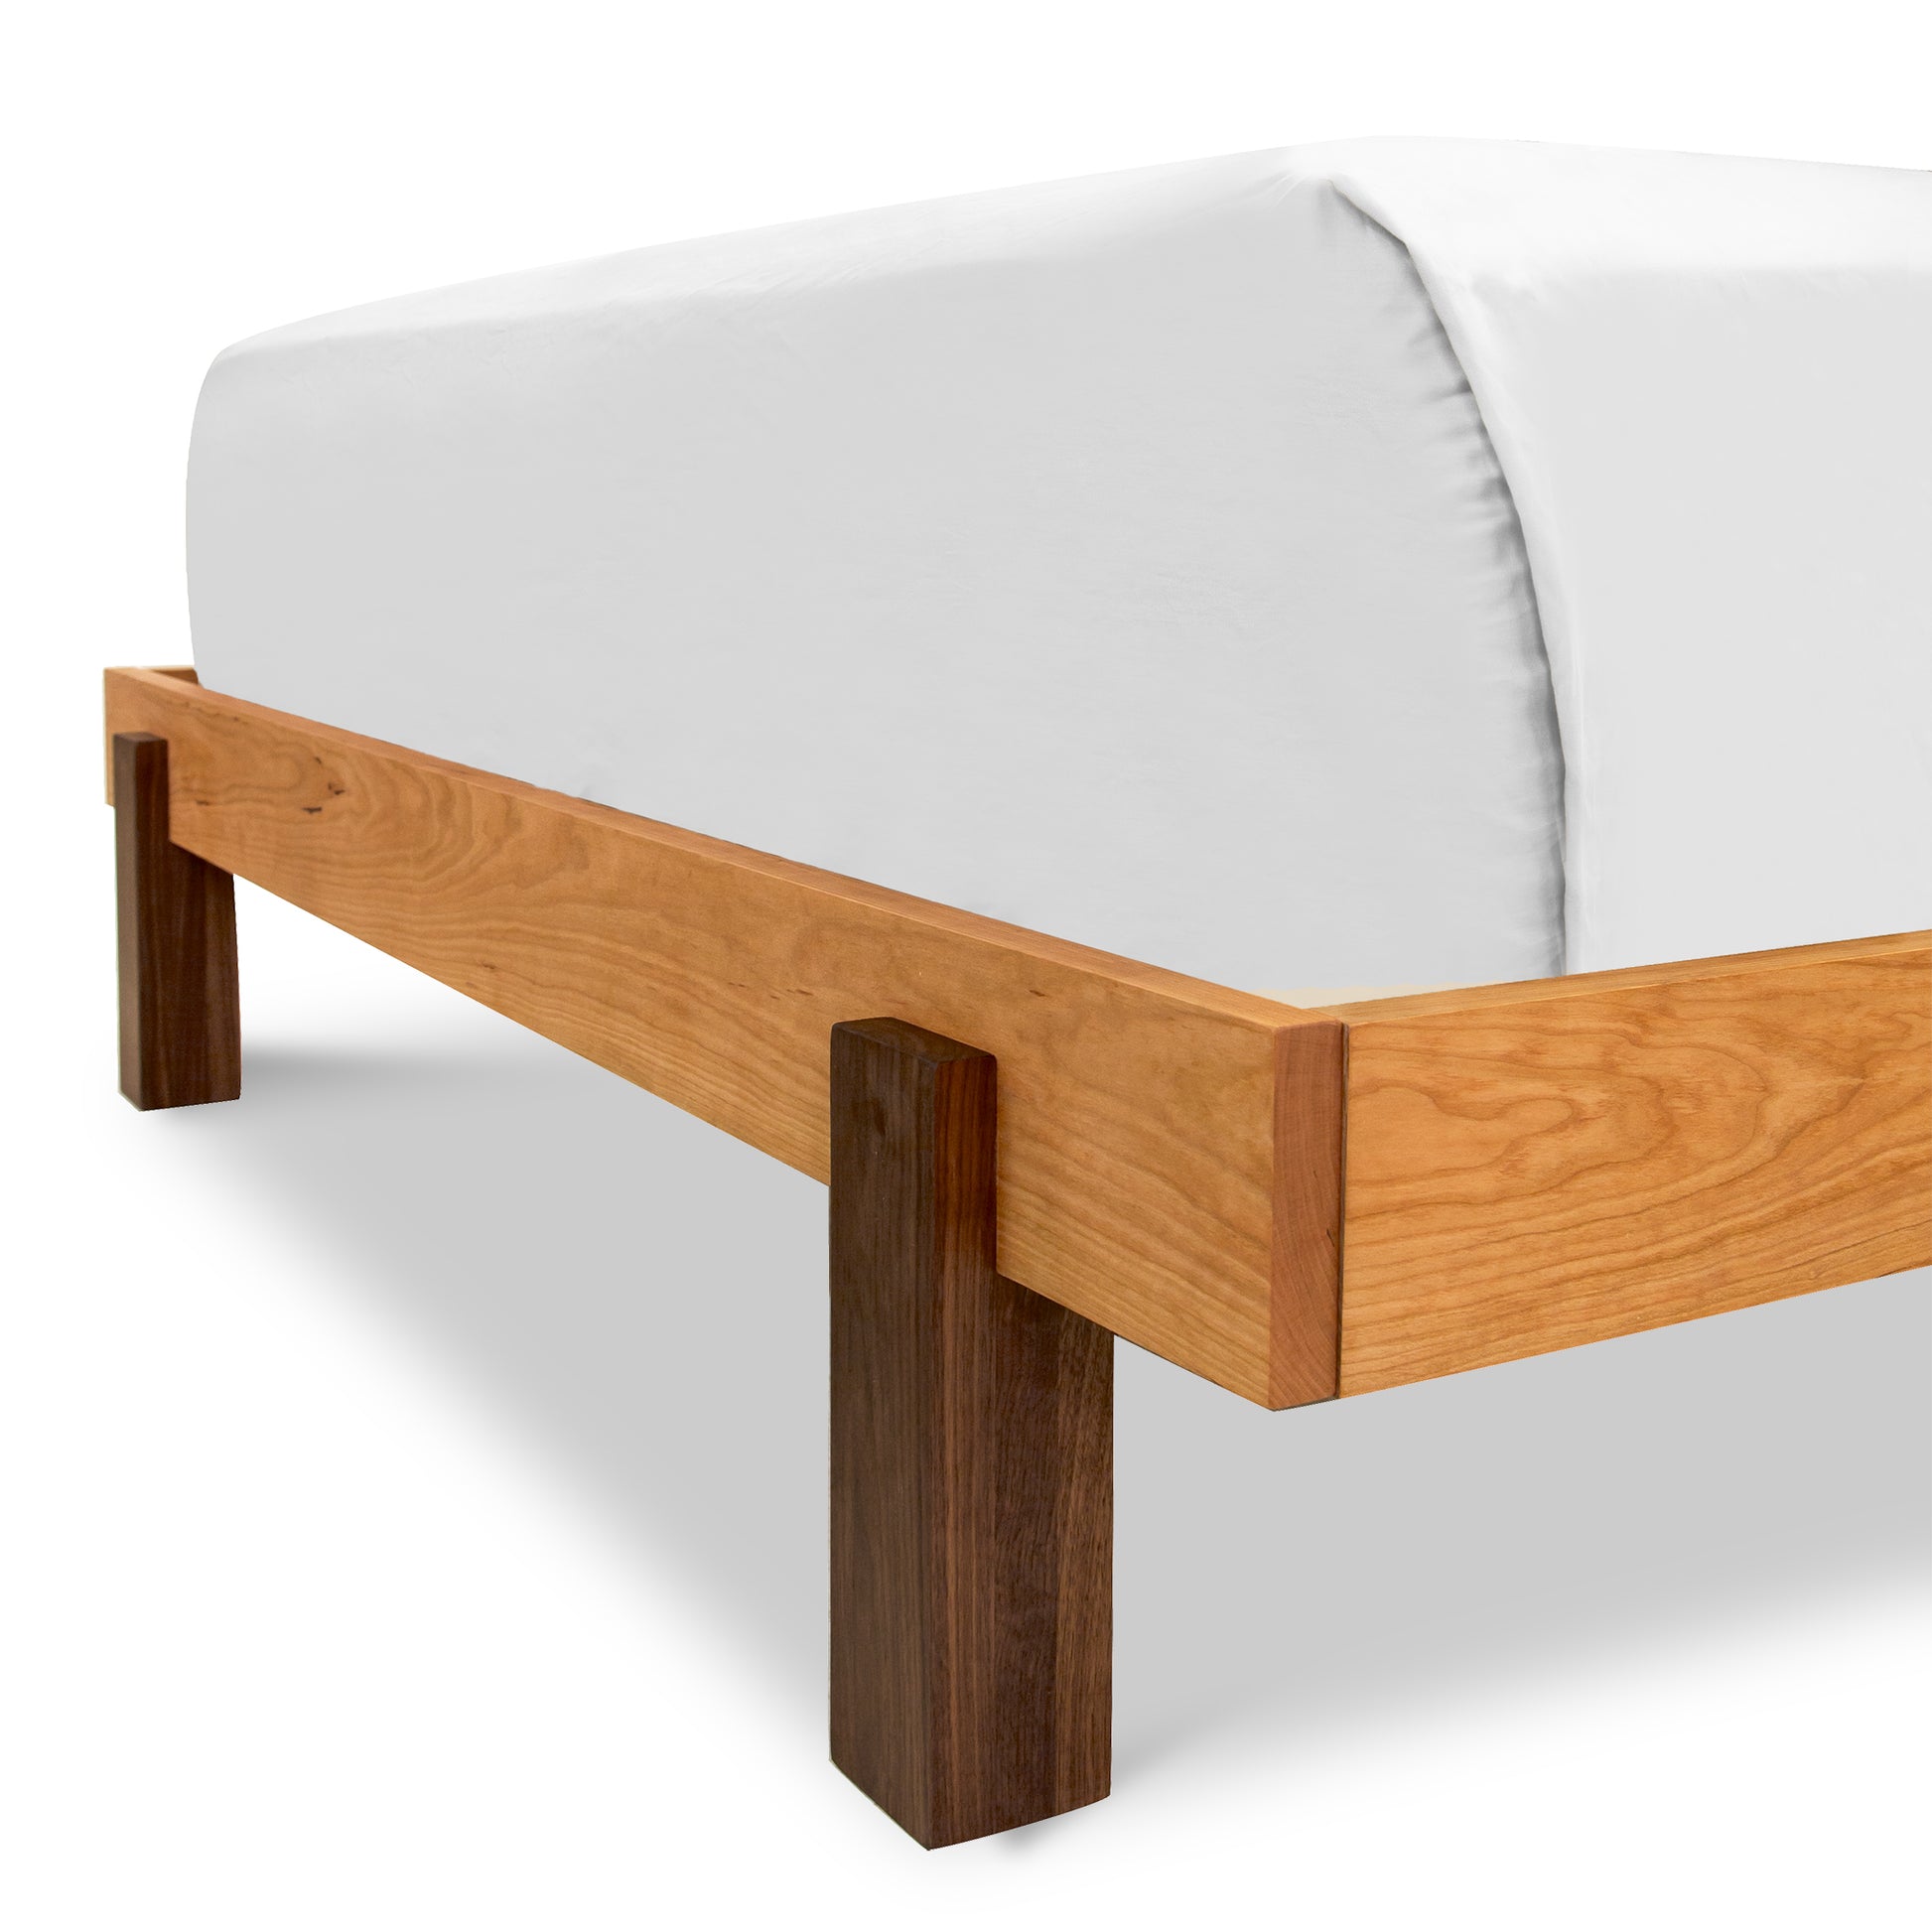 A minimalist wooden Modern American Platform Bed frame from Vermont Furniture Designs, crafted from solid hardwoods, with a corner view showcasing clean lines and a white mattress without bedding as part of our Modern American Platform Bedroom Furniture collection.